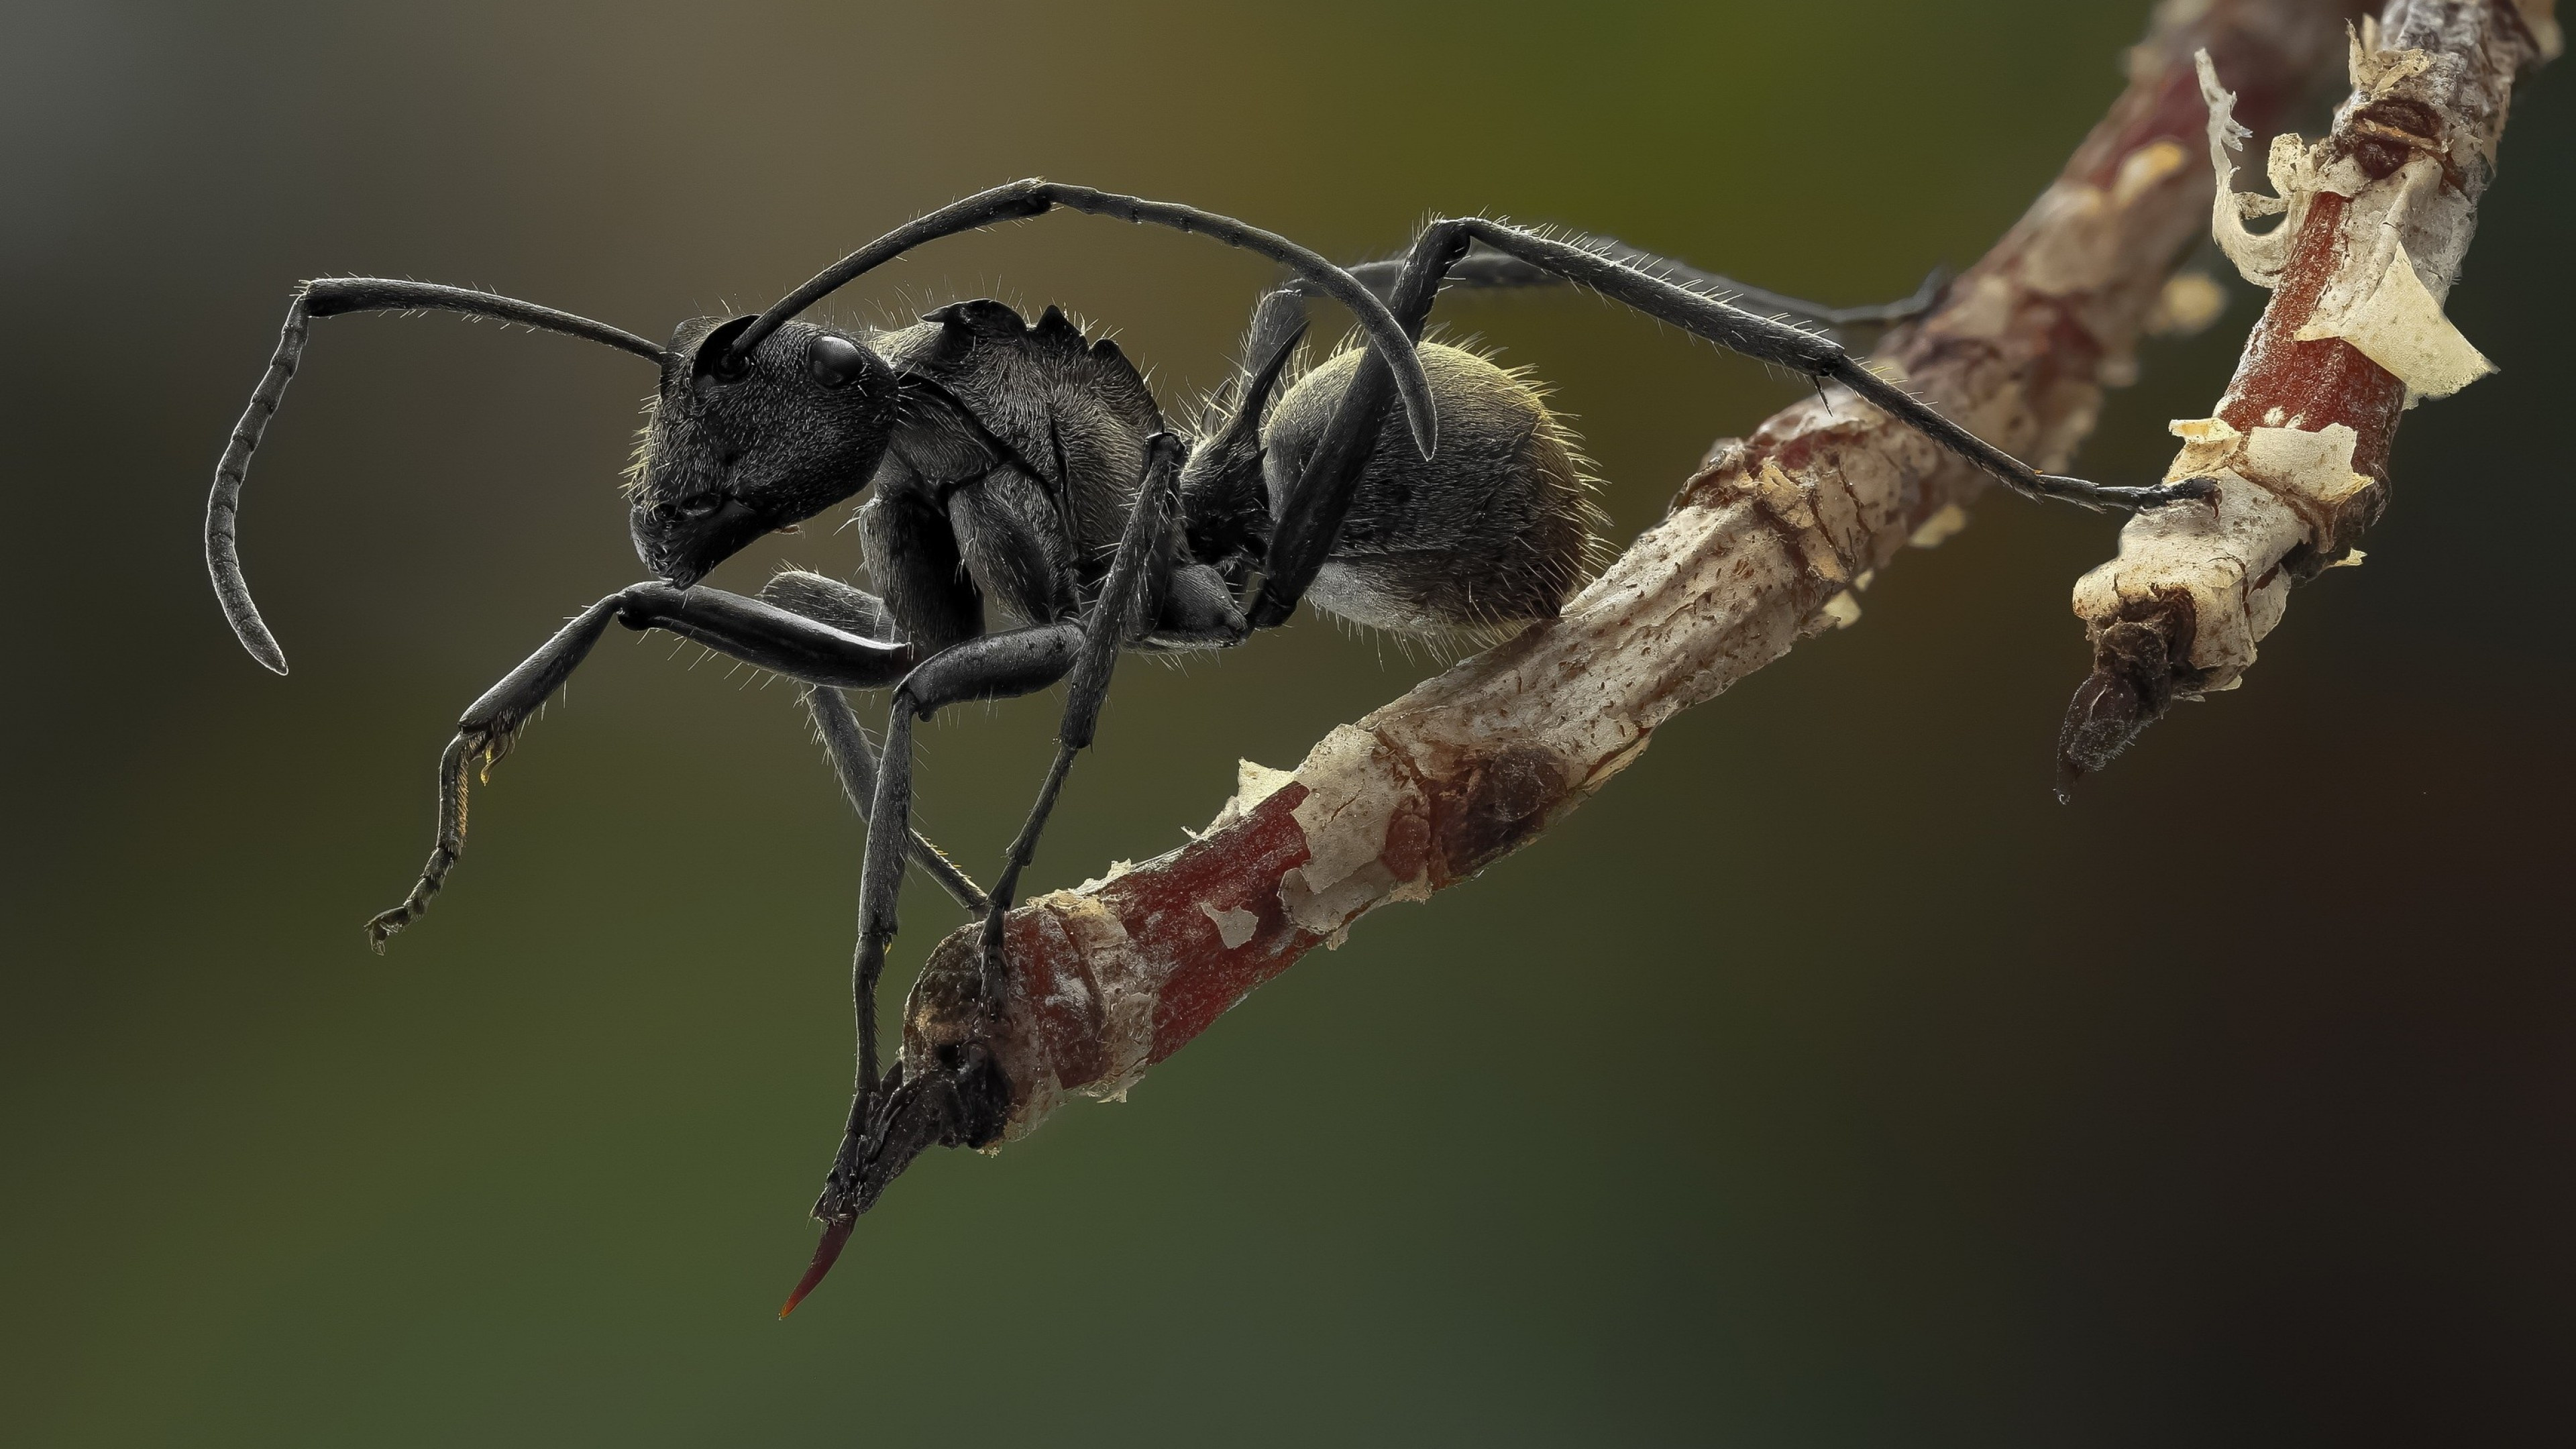 Black ant insects, Macro photography, UHD TV wallpapers, Branch details, 3840x2160 4K Desktop